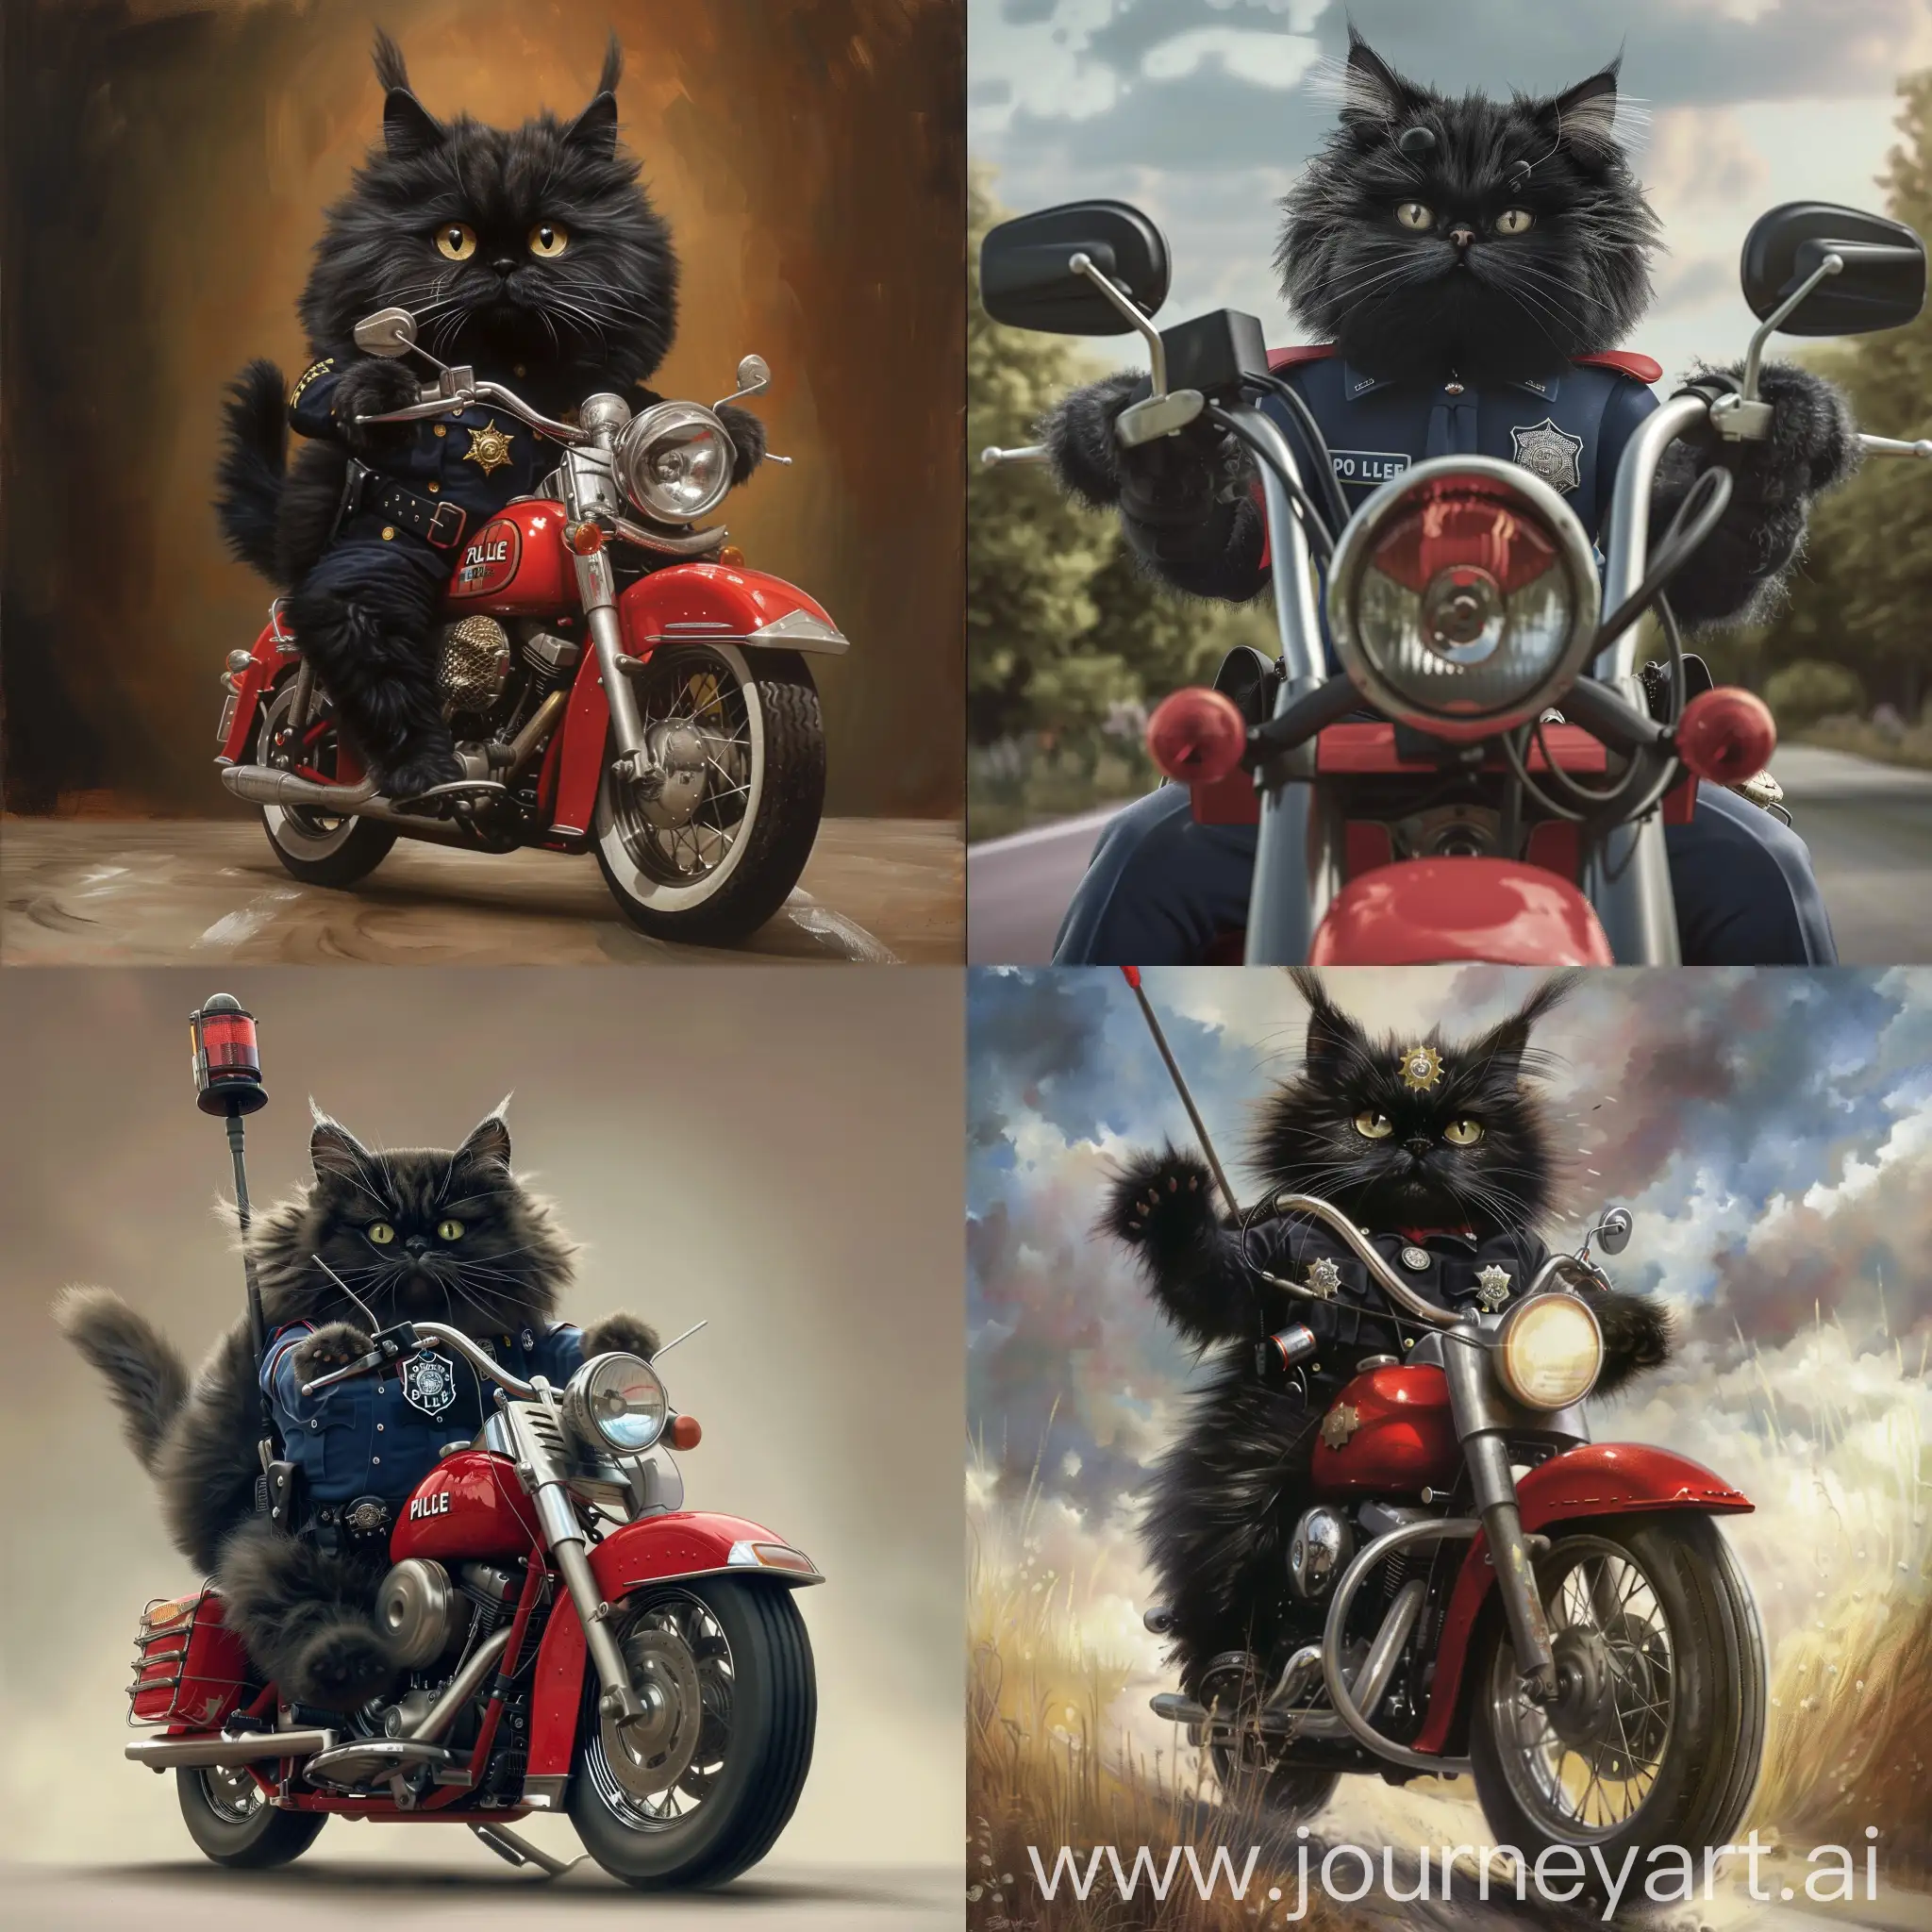 Photorealism A black fluffy cat in a policeman's uniform rides a red motorcycle